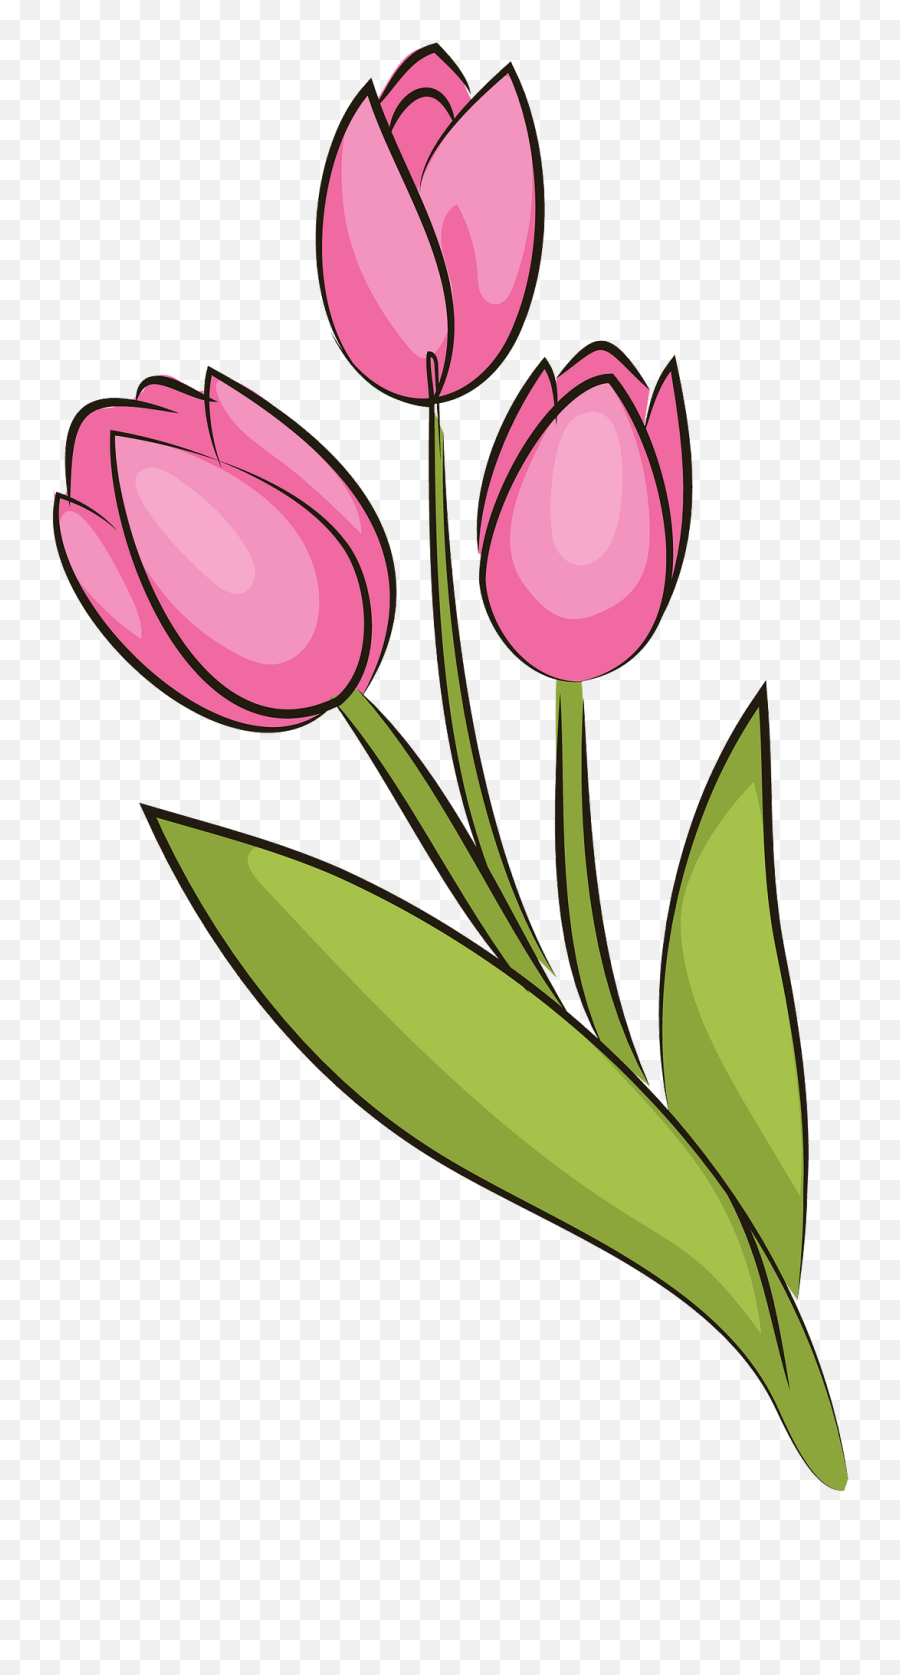 Bouquet Of Tulips Clipart - Tulips Clipart Emoji,Tulips Clipart